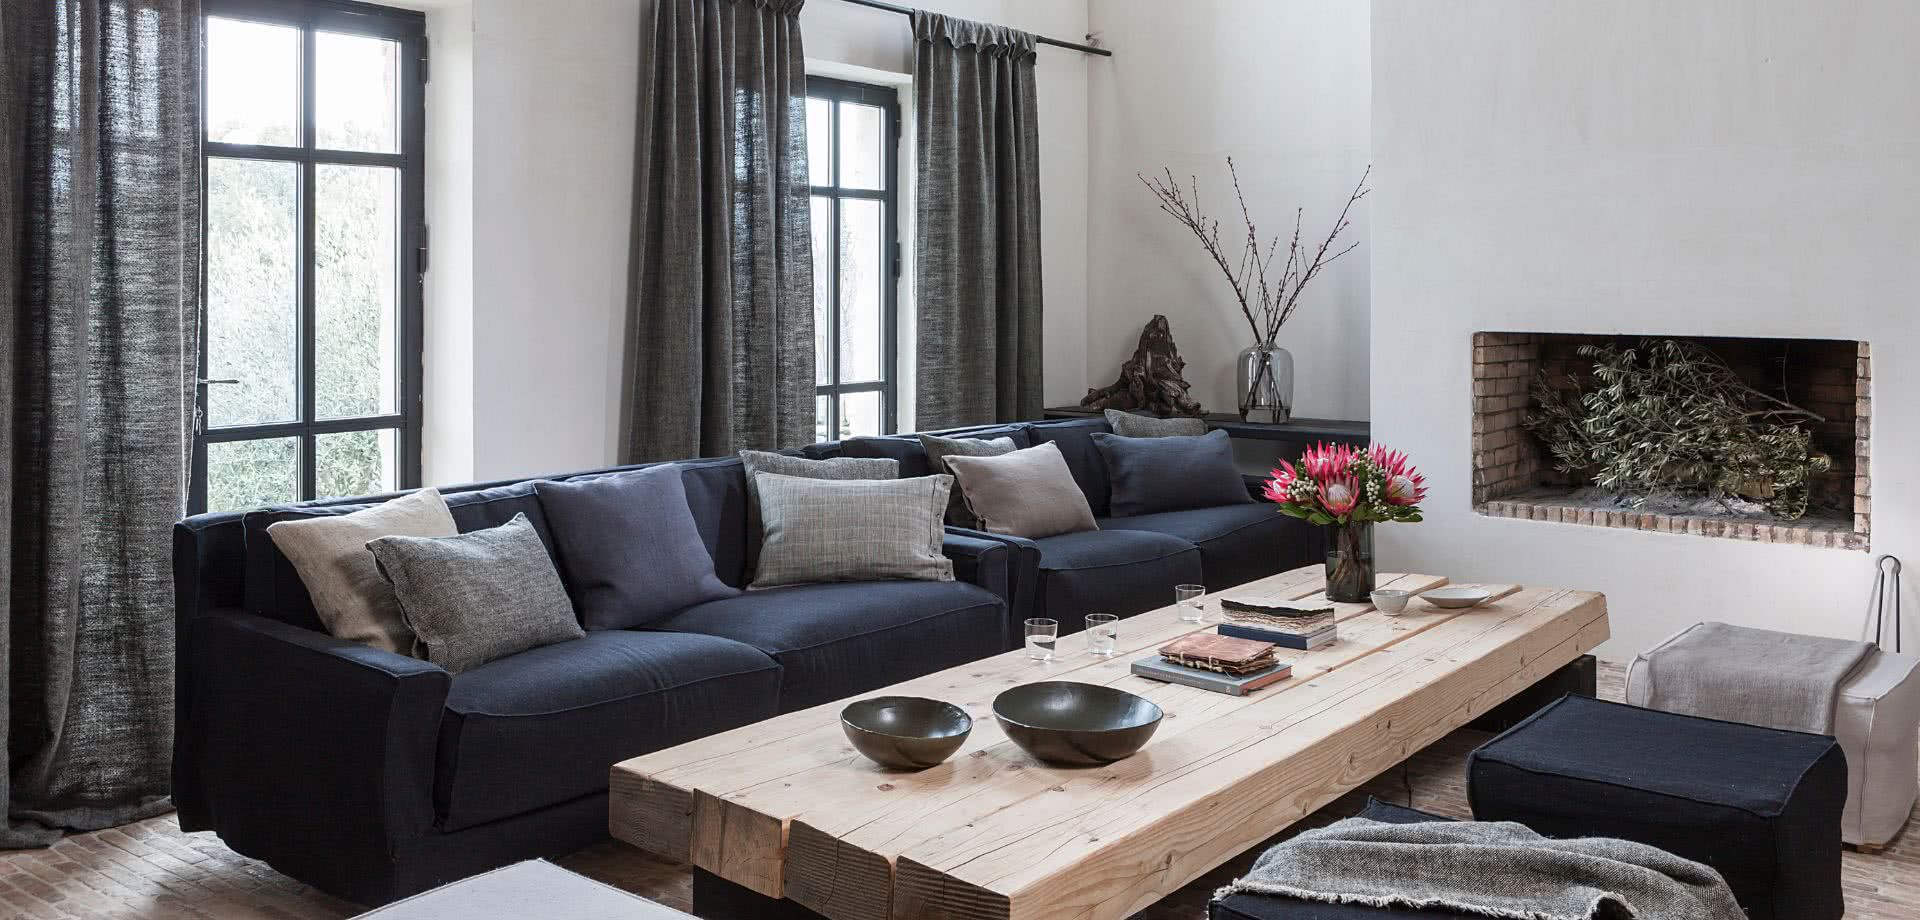 Linen is the perfect addition to interior design